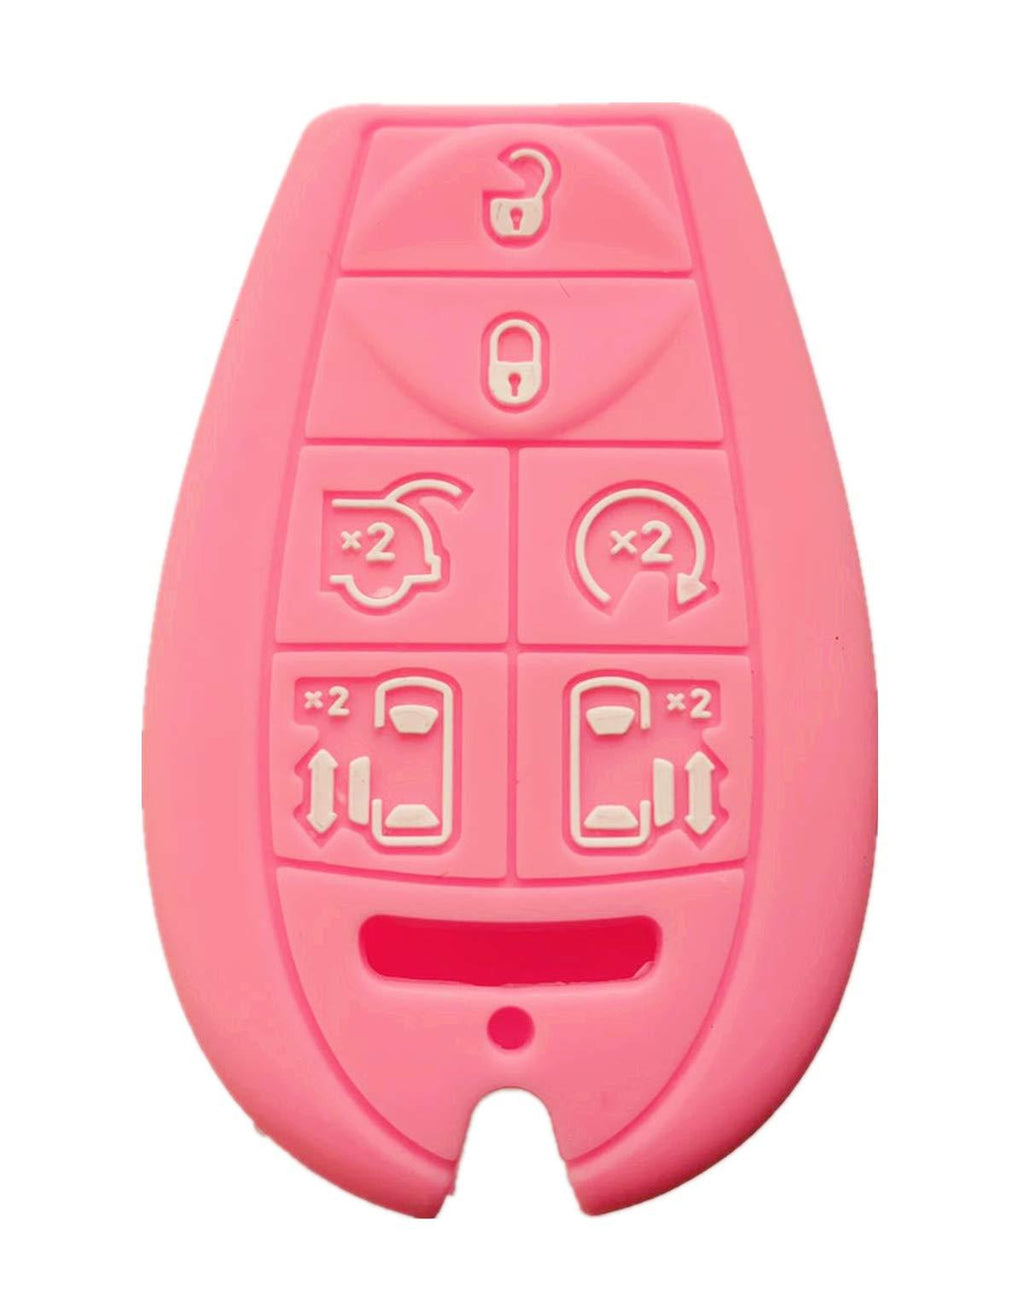 Rpkey Silicone Keyless Entry Remote Control Key Fob Cover Case protector Replacement Fit For Dodge Grand Caravan Volkswagen Routan M3N5WY783X 2701A-C01C 68043594AA 68043594 AA(Pink) - LeoForward Australia